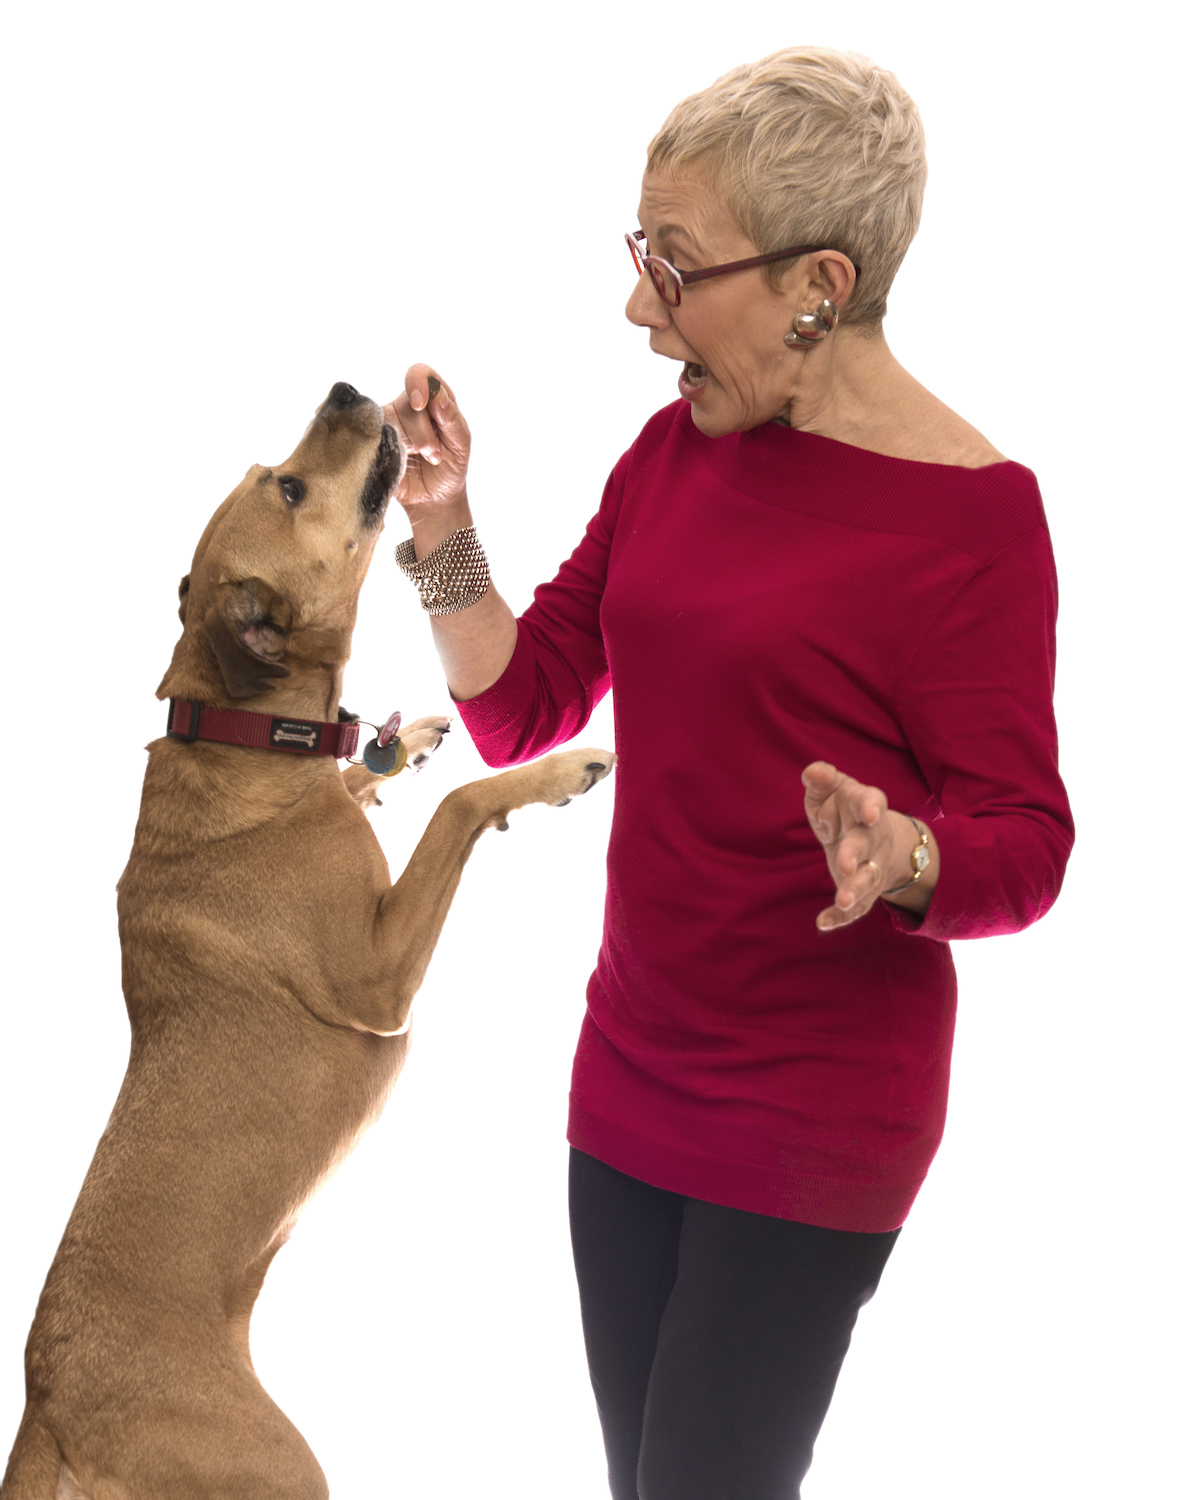 A photo of author Rona Maynard and her dog, Casey. Casey stands on his hind legs to get a treat from Rona's hand.